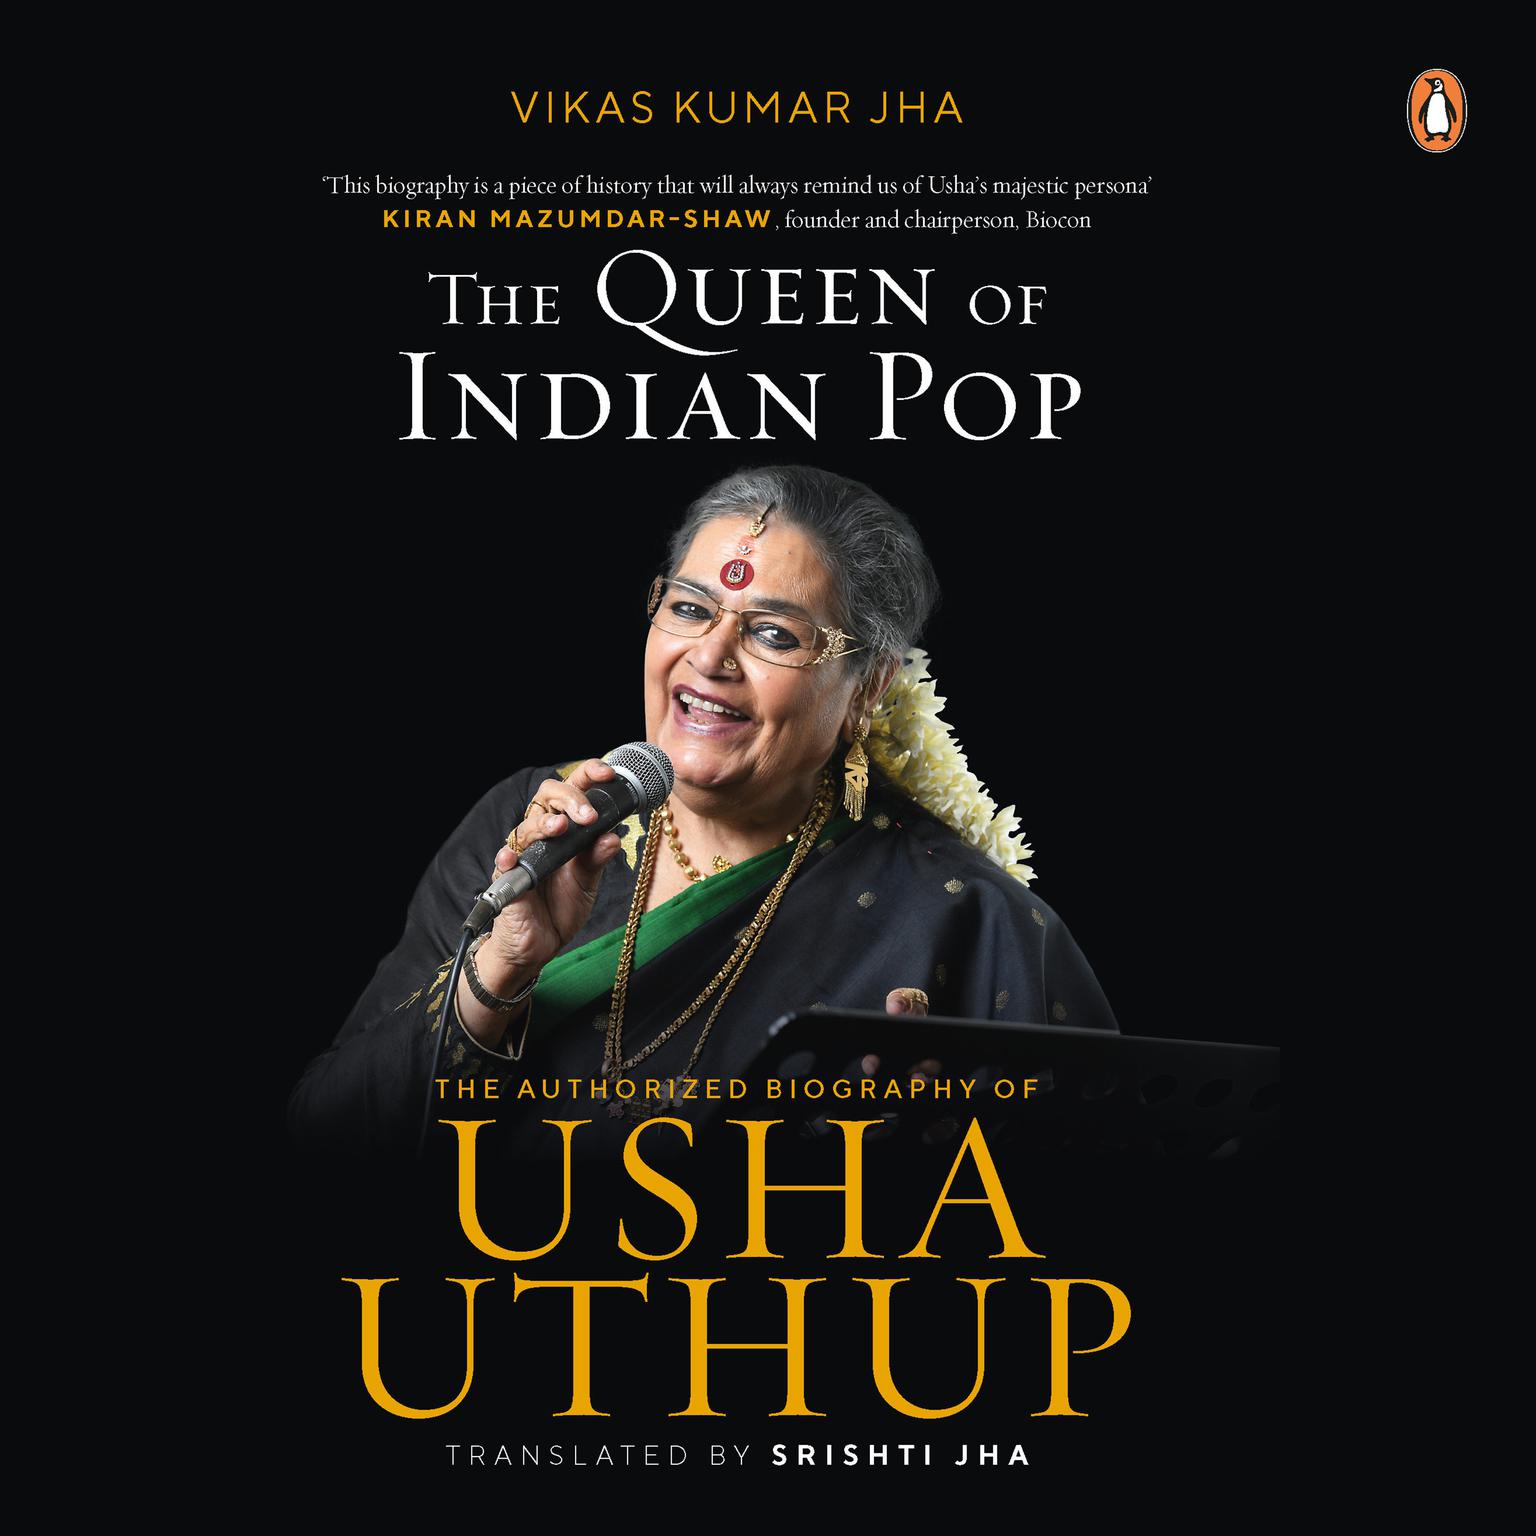 The Queen of Indian Pop: The Authorised Biography of Usha Uthup: The Authorized Biography Of Usha Uthup Audiobook, by Vikas Kumar Jha